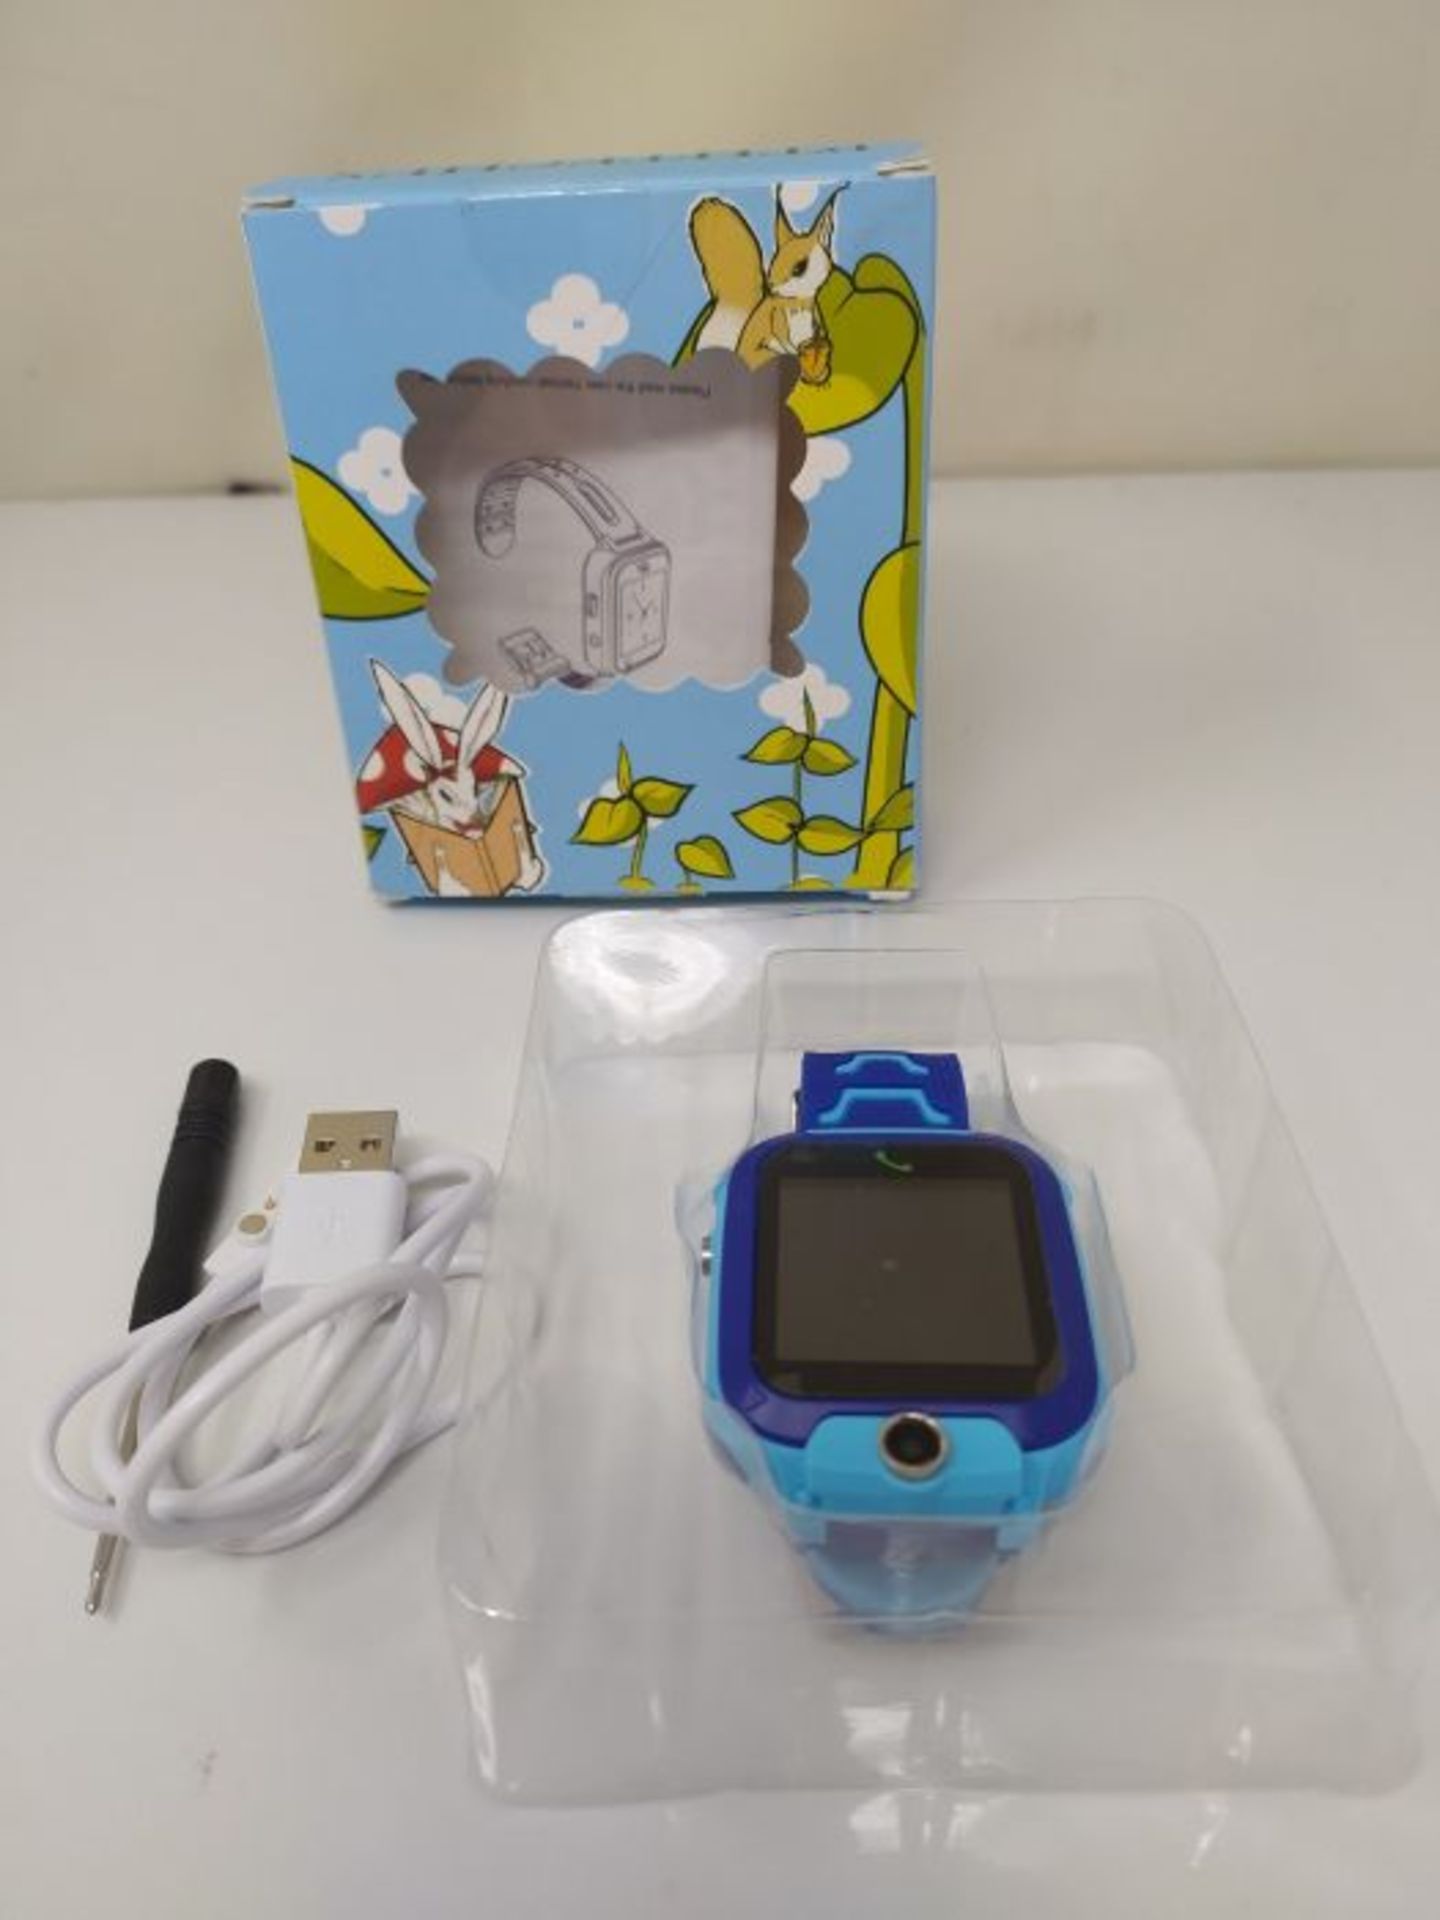 PTHTECHUS Kids Smart watch Waterproof Phone, LBS Tracker Smart Watches for Boys Girls - Image 2 of 2